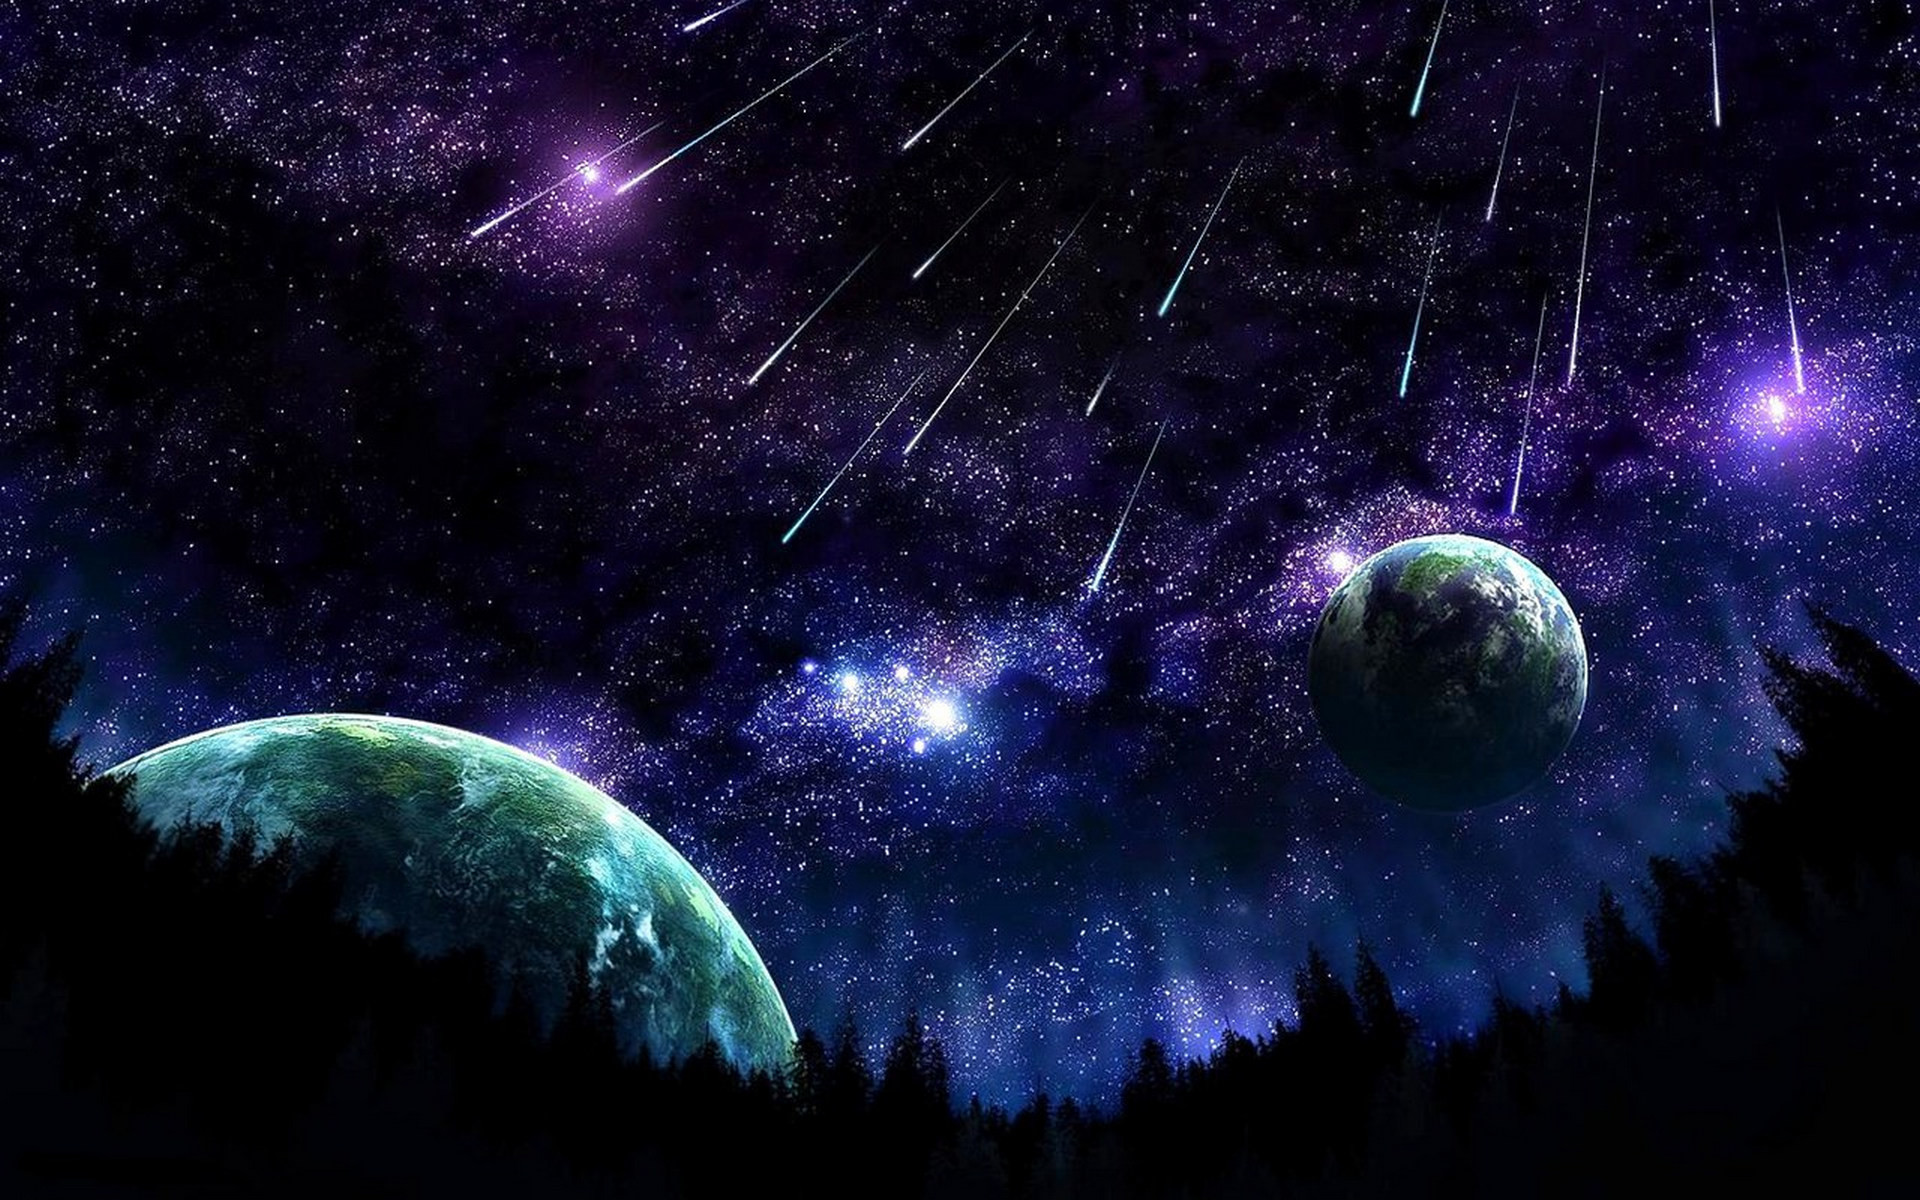 Free desktop wallpapers and backgrounds with meteor shower, cosmos, planet, space, universe. Wallpapers no